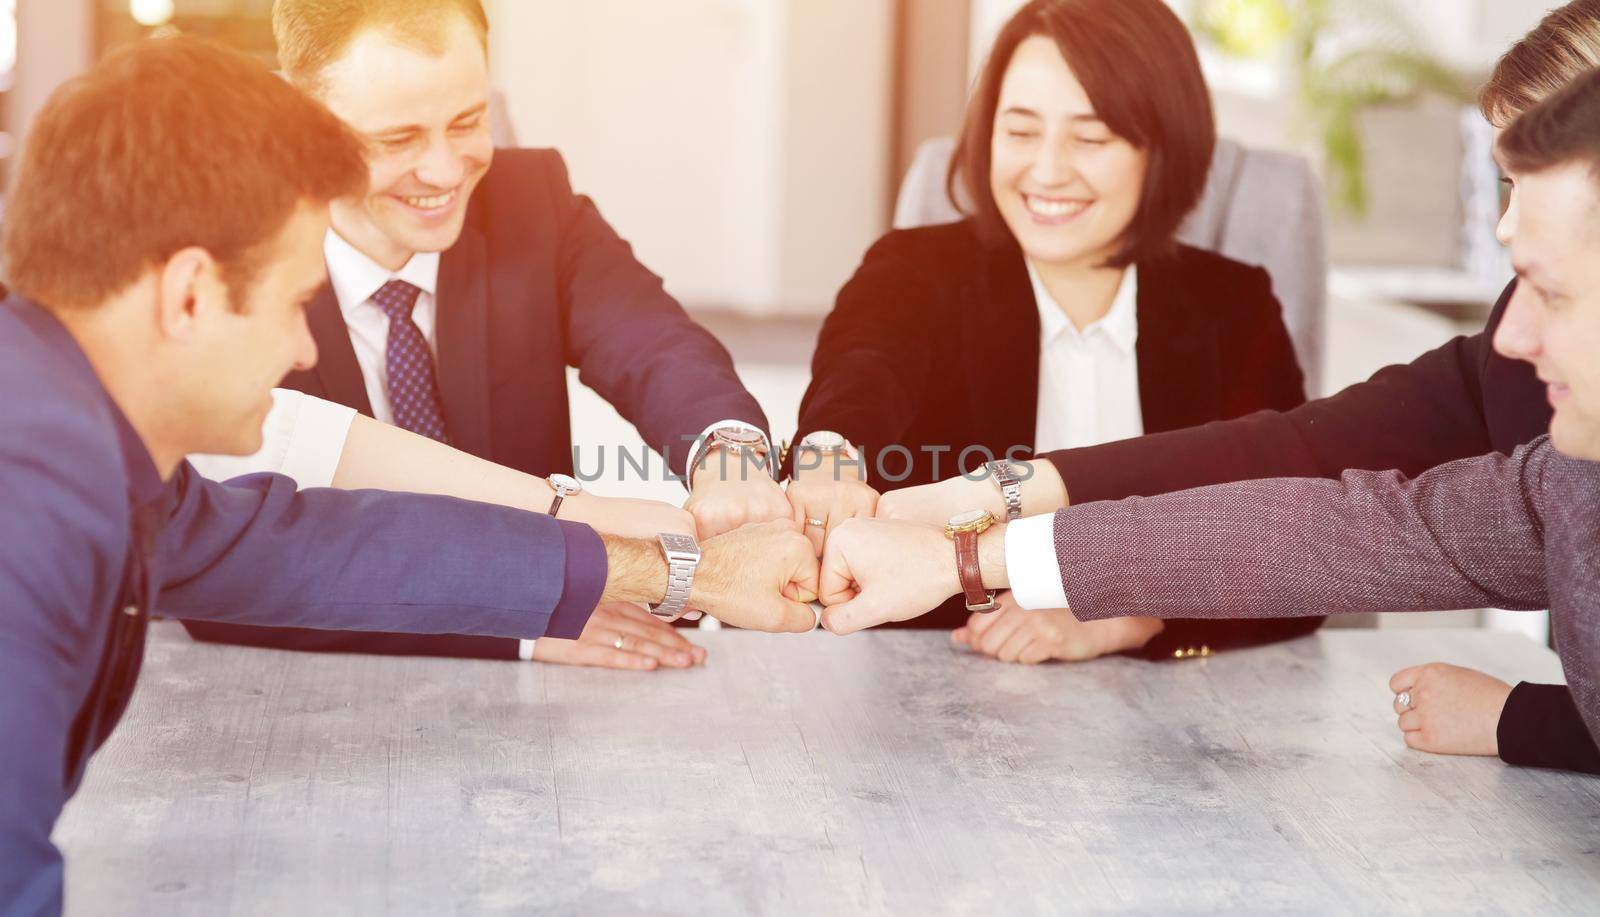 Unity and teamwork concept of young business people folding their hands together by selinsmo